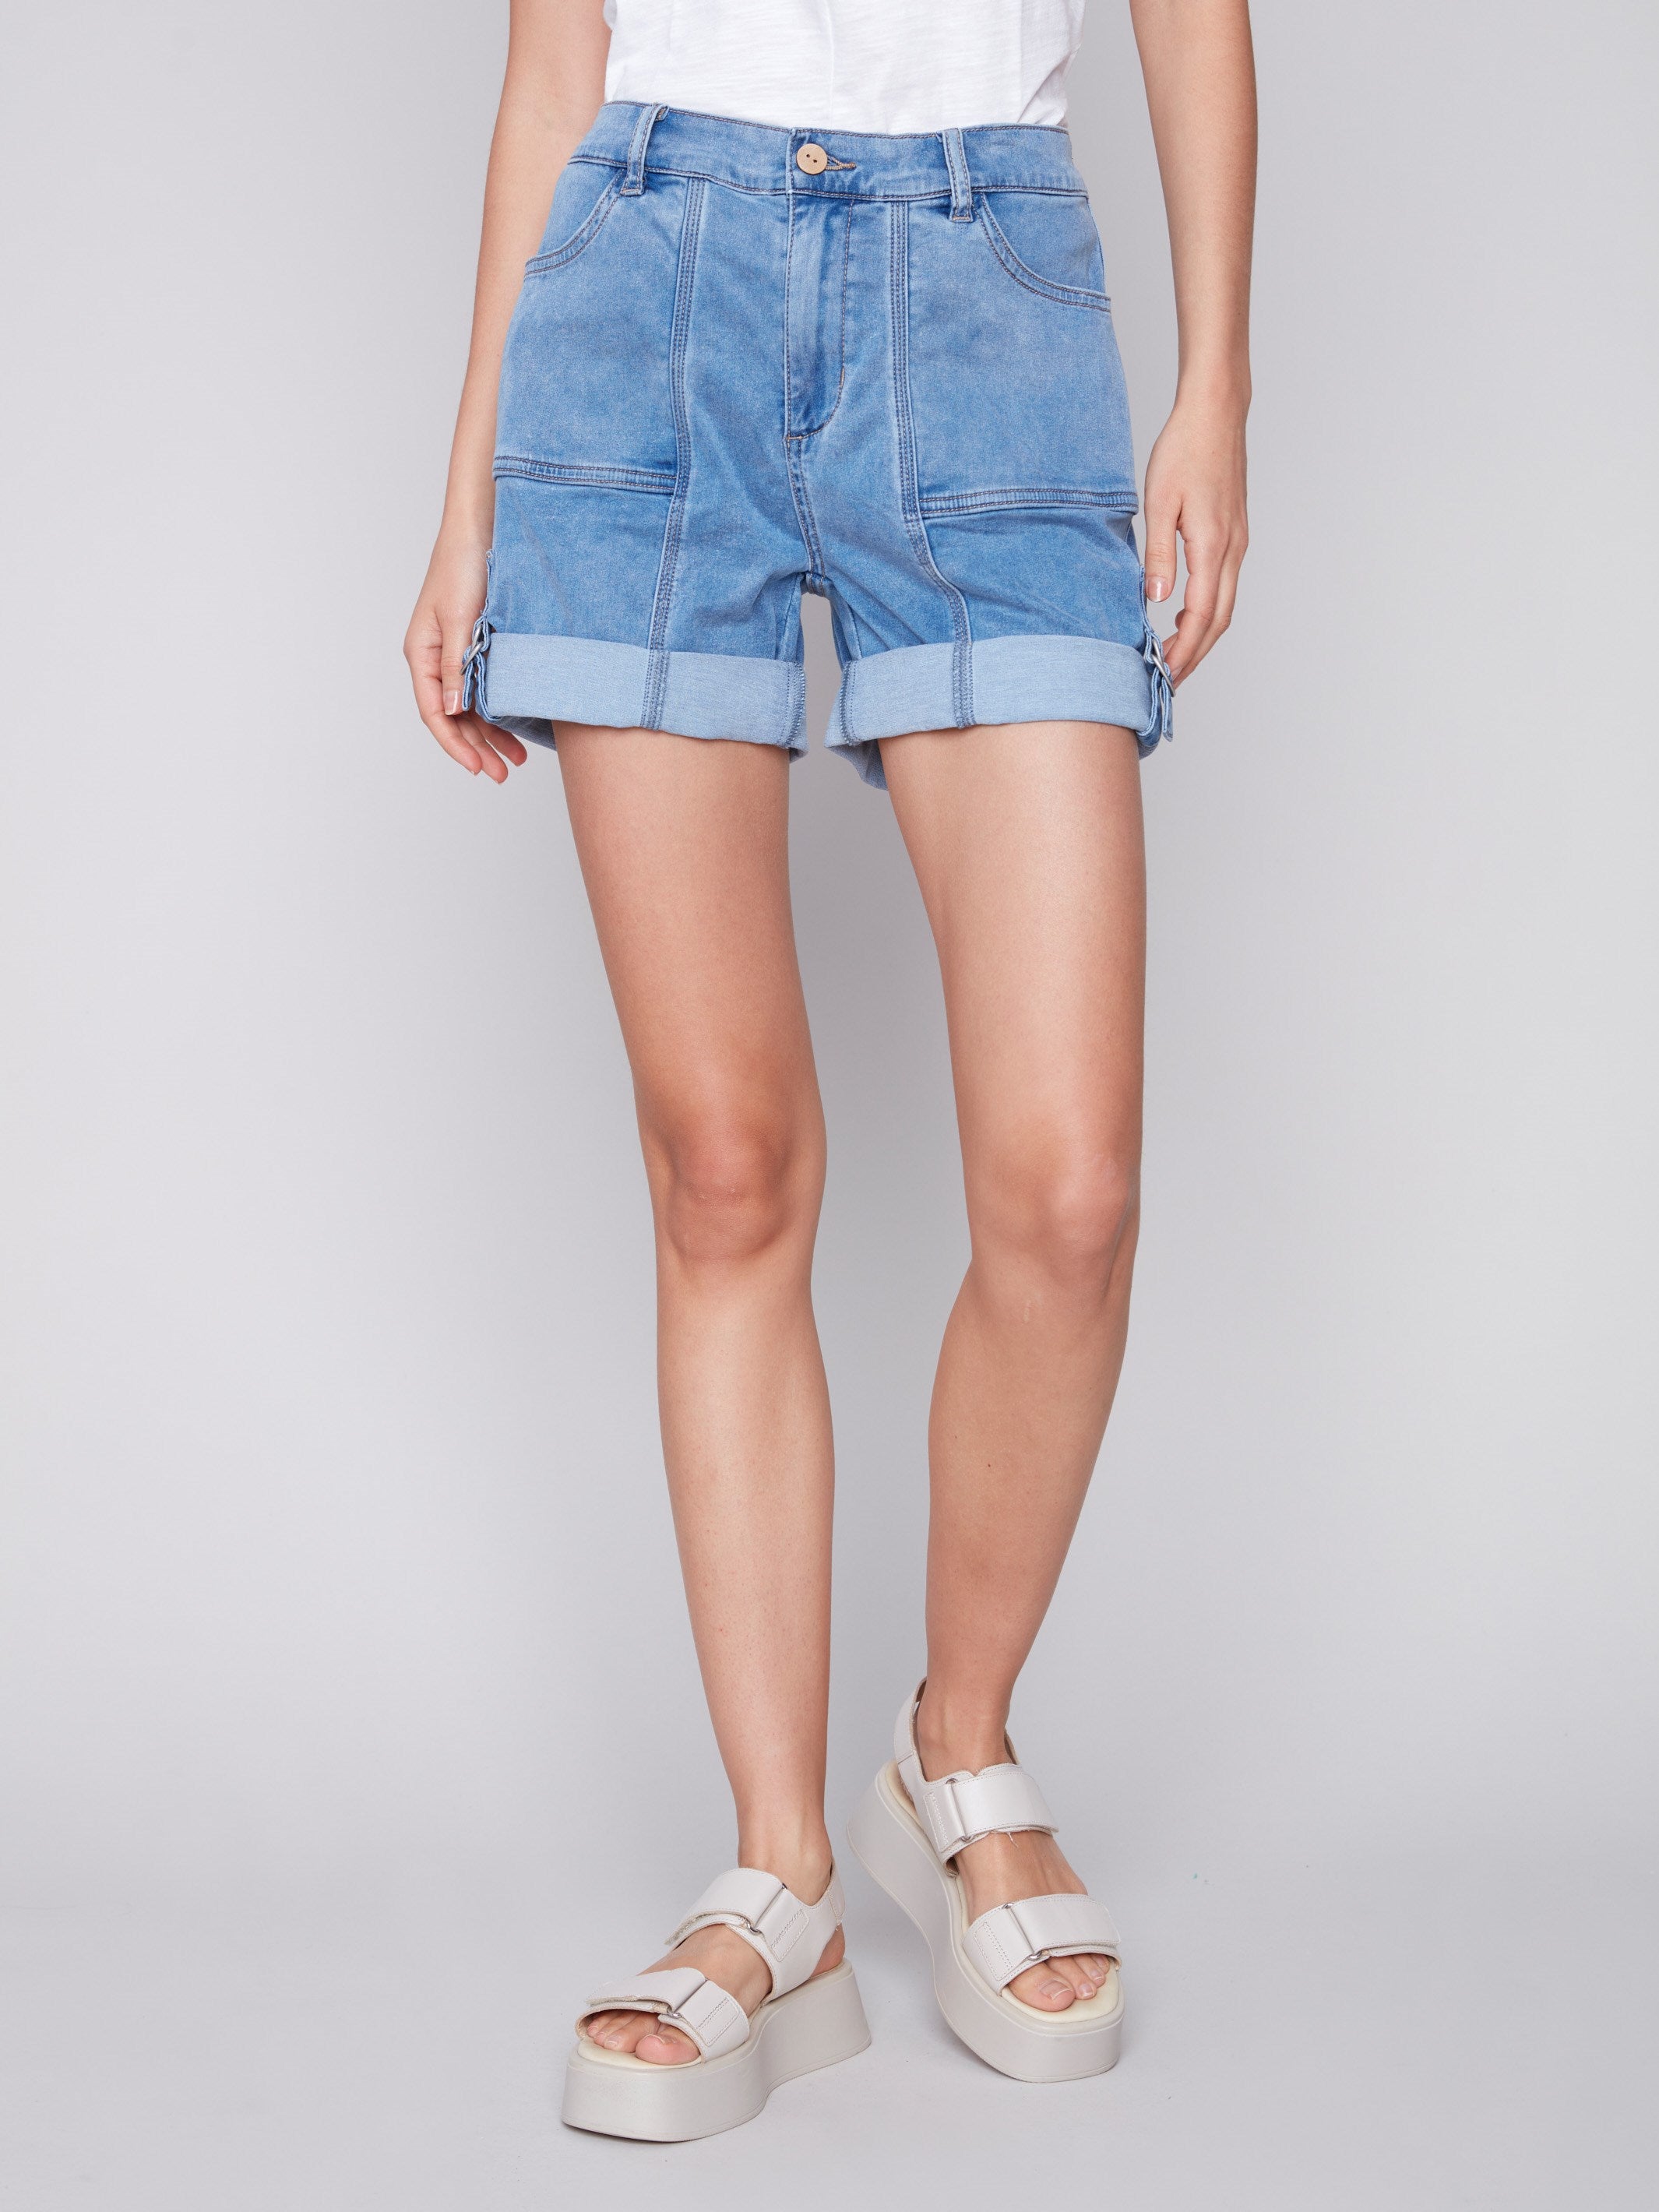 Canvas Cargo Shorts - Chambray - Charlie B Collection Canada - Image 3